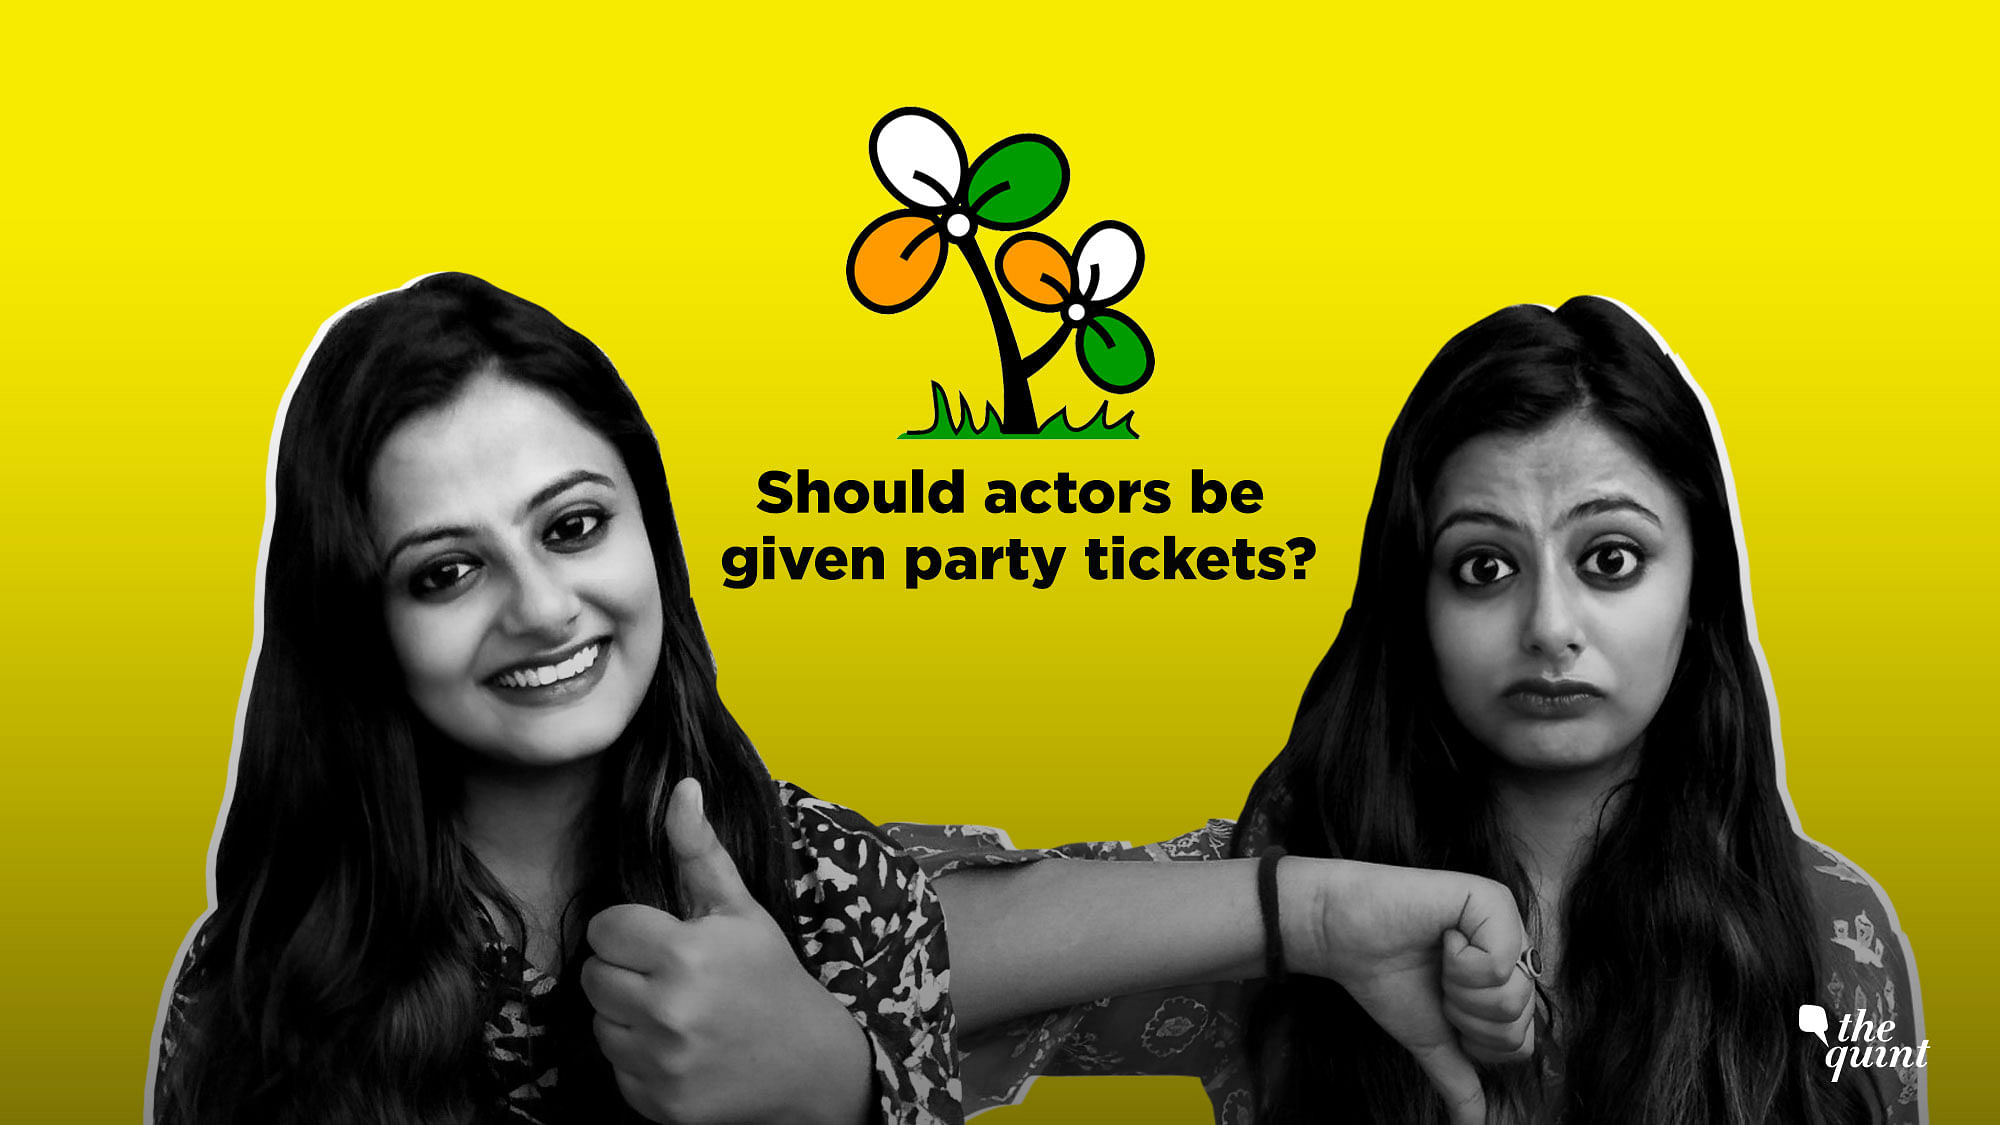 <b>The Quint</b> debates if it was a good decision by the Trinamool Congress to have given tickets to actors like Nusrat and Mimi.